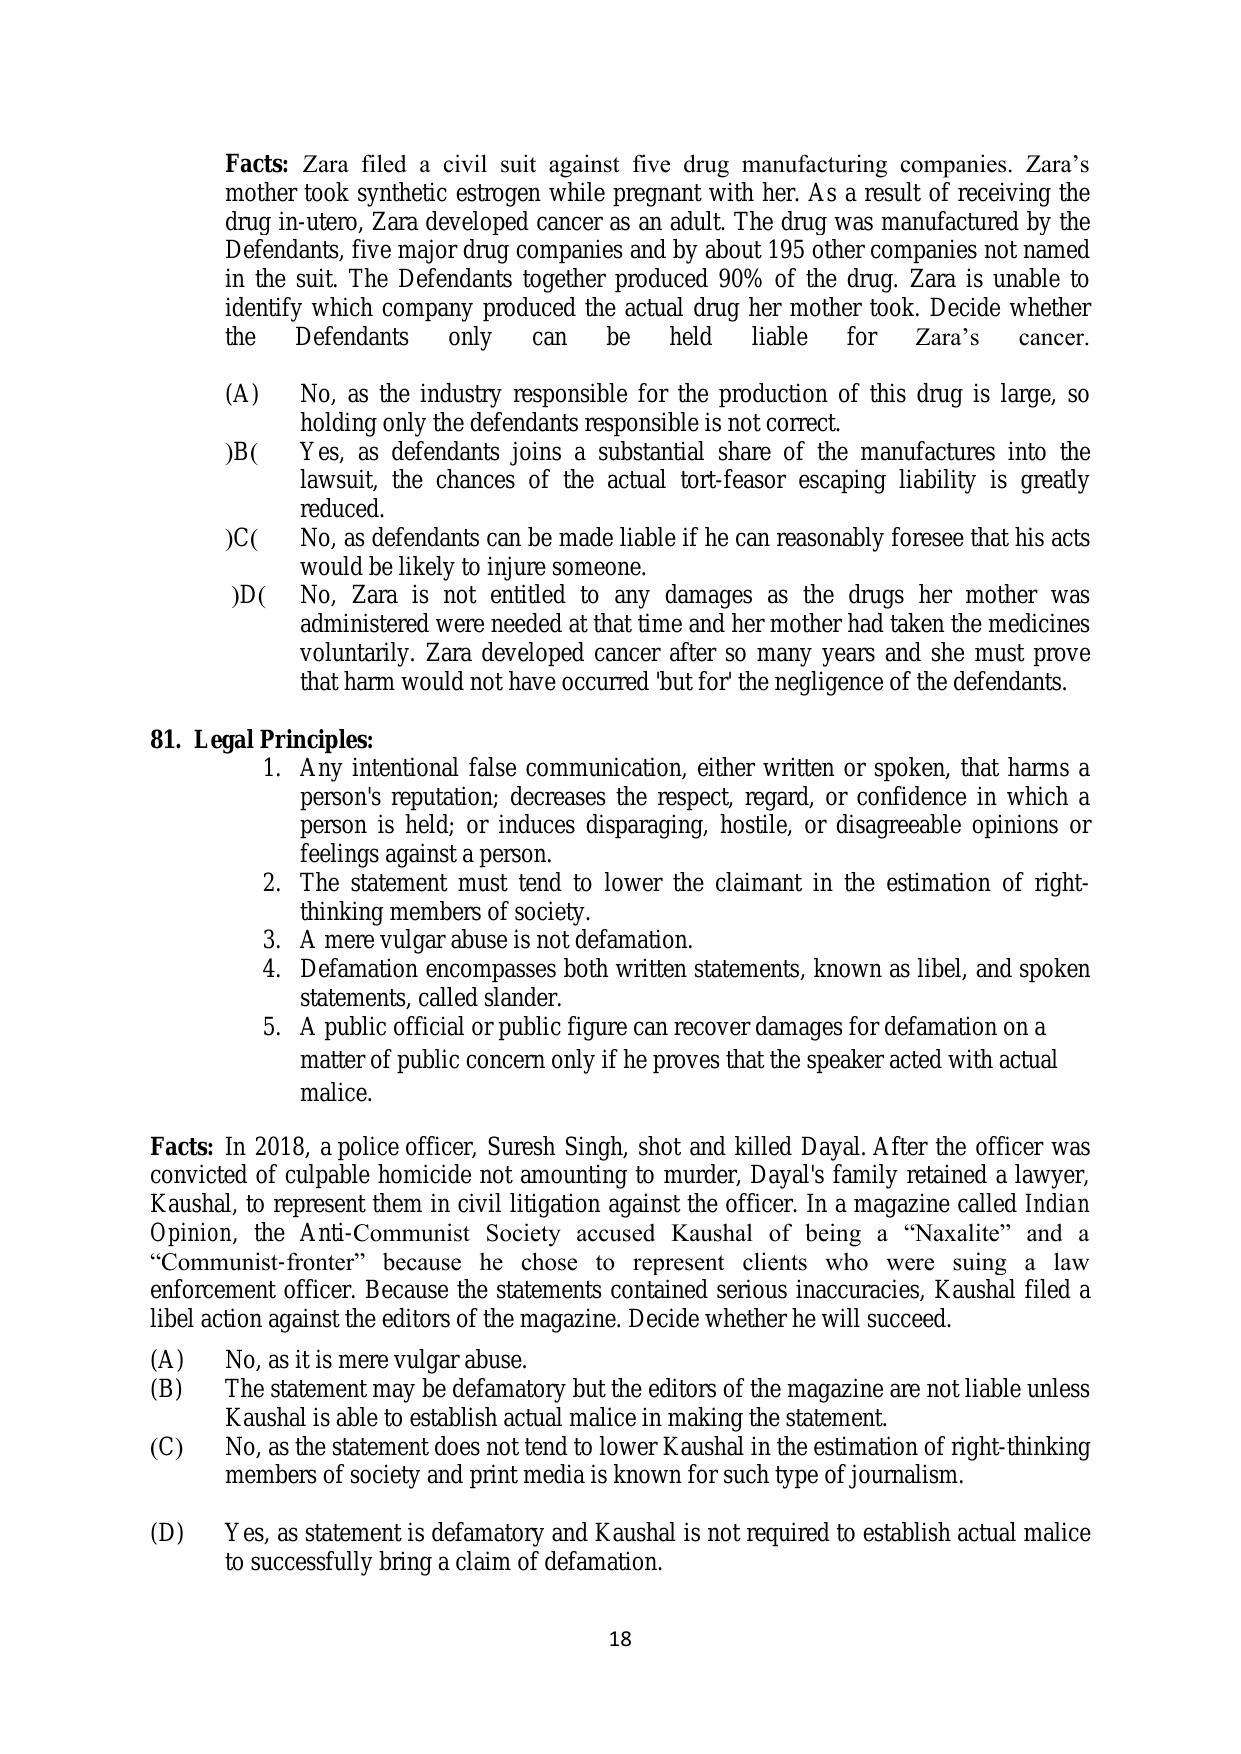 AILET 2020 Question Paper for BA LLB - Page 18